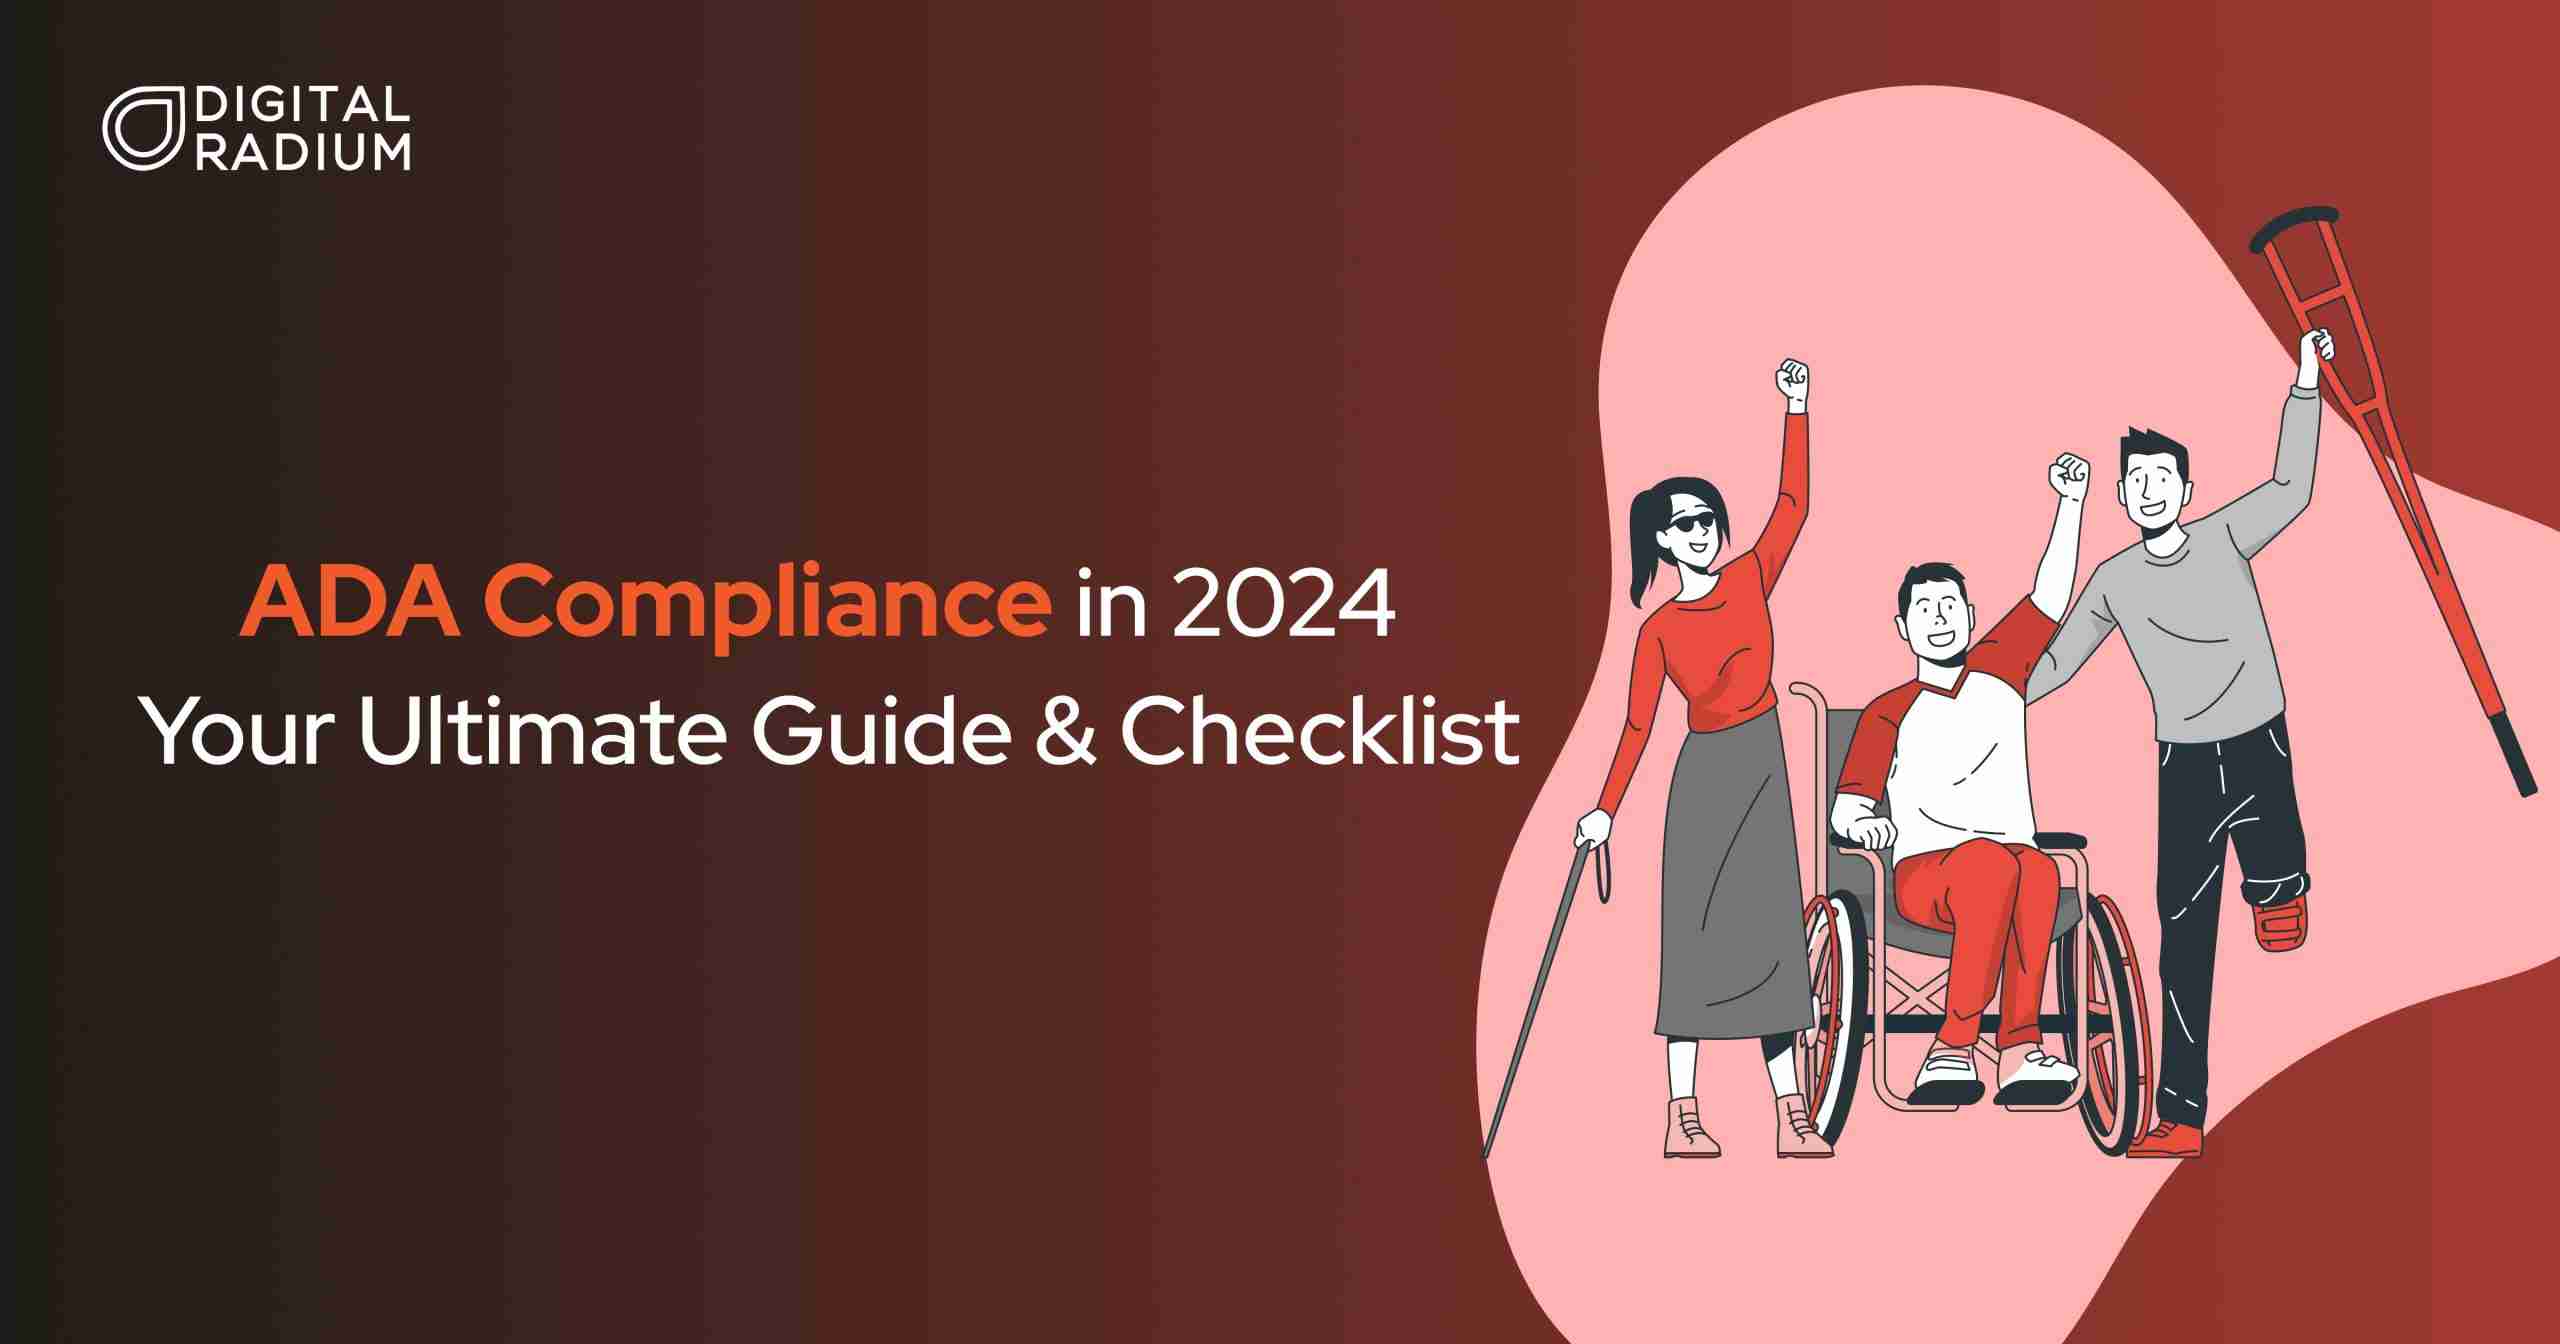 ADA Compliance in 2024: How to Make Your Website ADA Compliant? A Detailed Guide